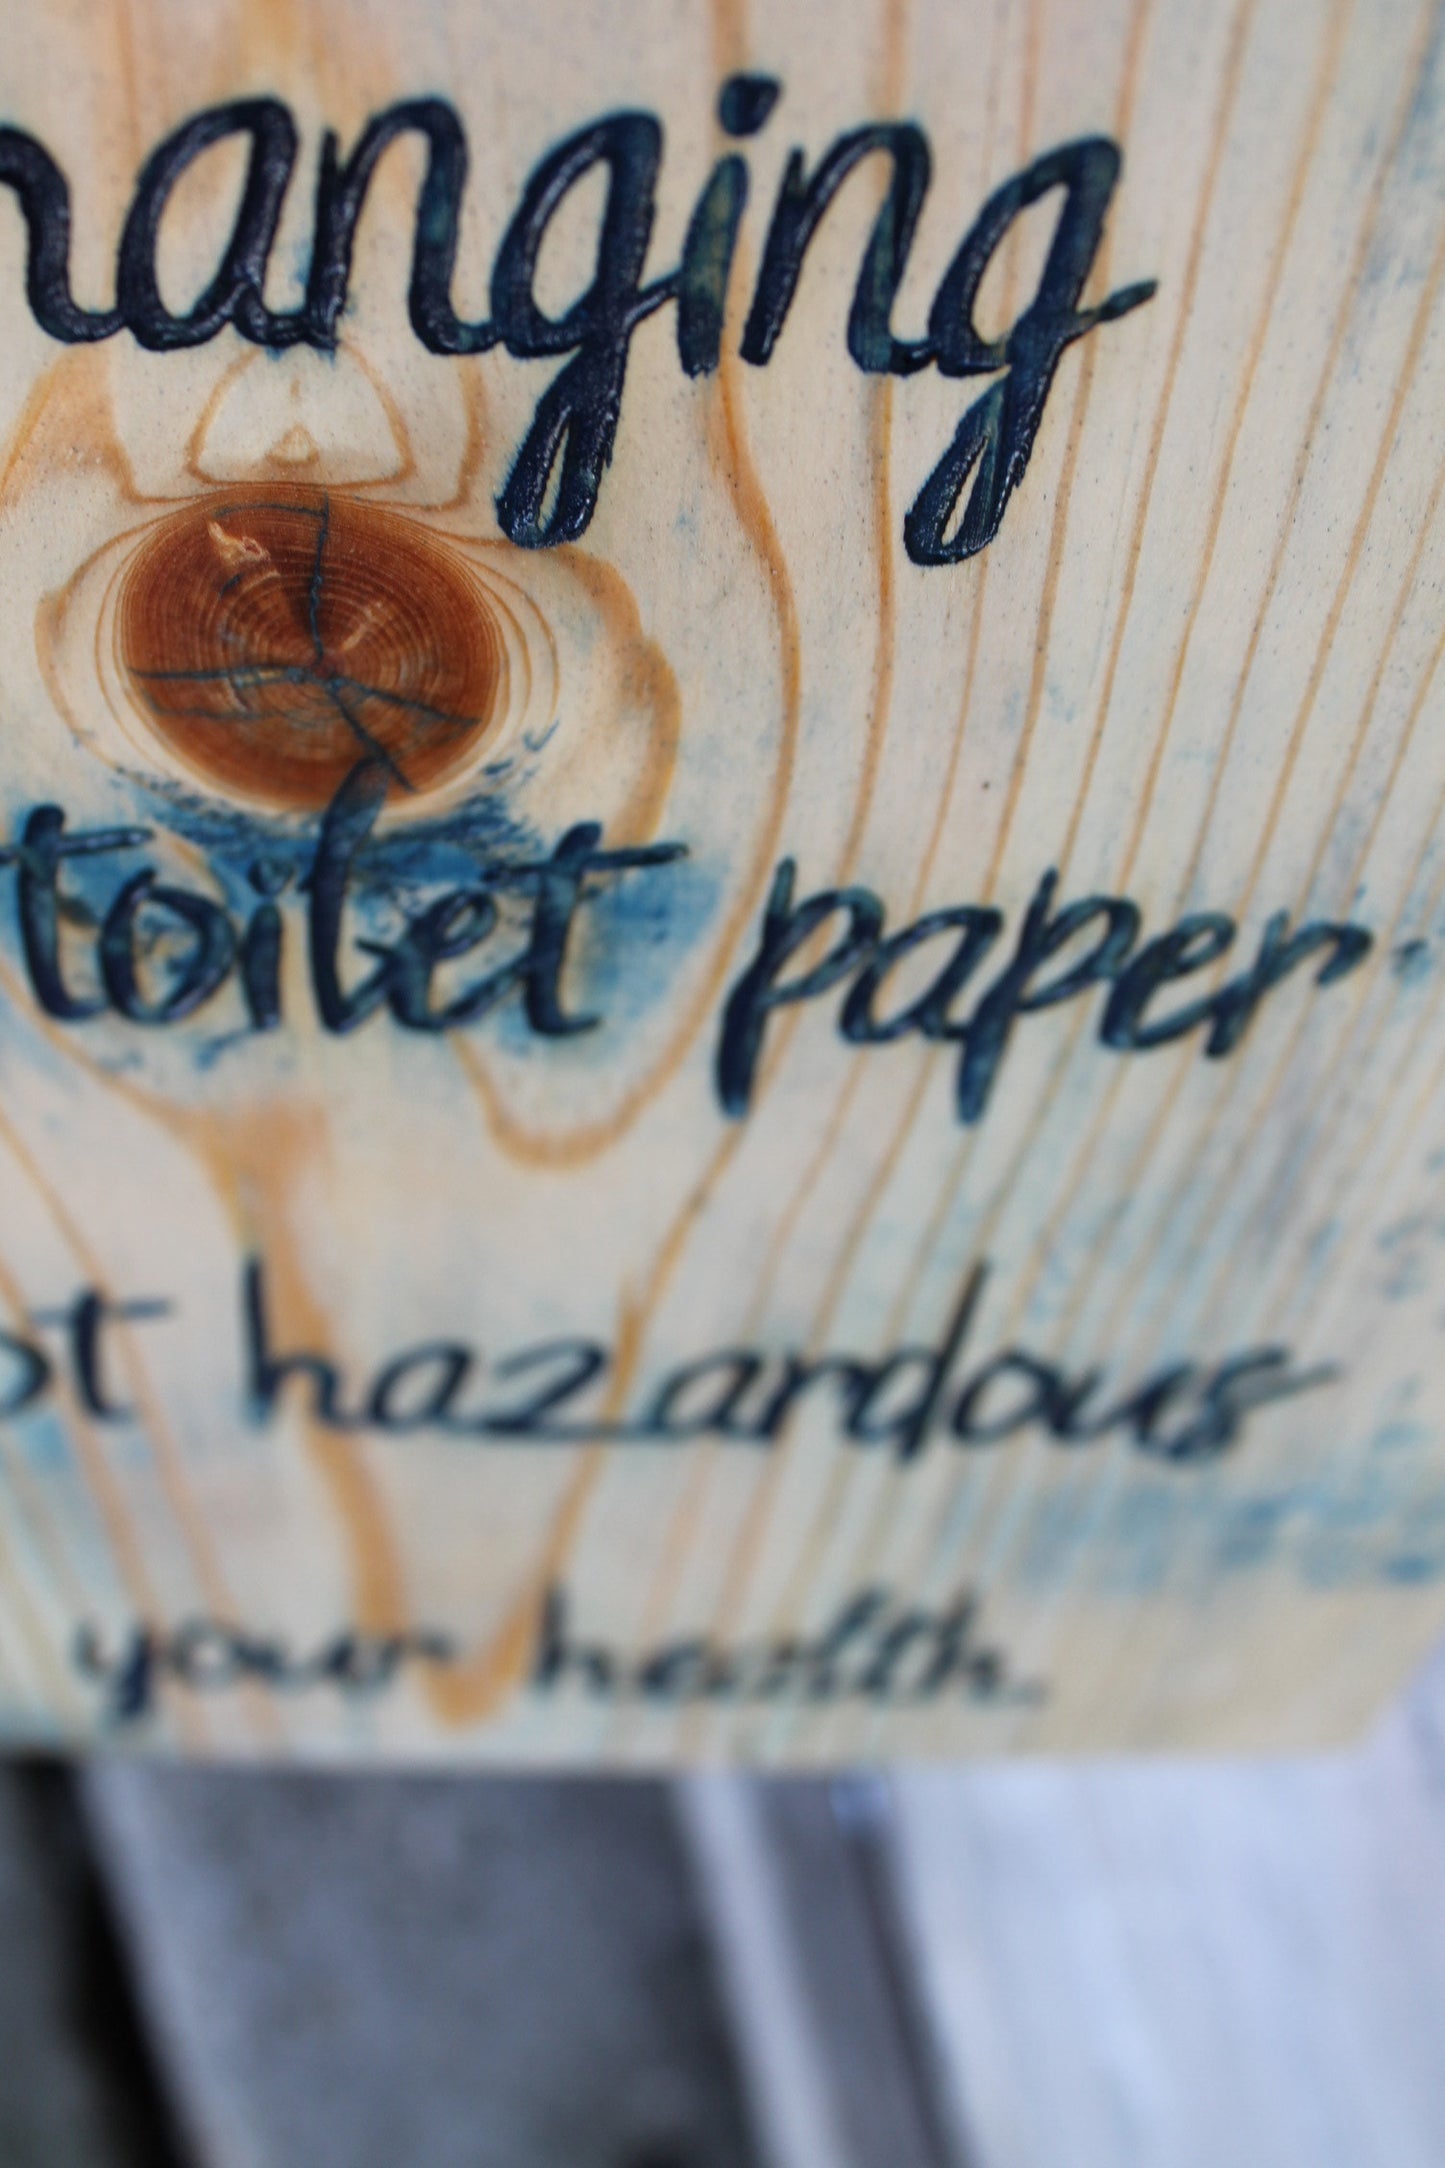 Funny, Bathroom, Sign  Toilet, Changing the Toilet Paper it not Hazardous  to your Health, Engraved, Rustic, Wood, Gross, Joke, Silly